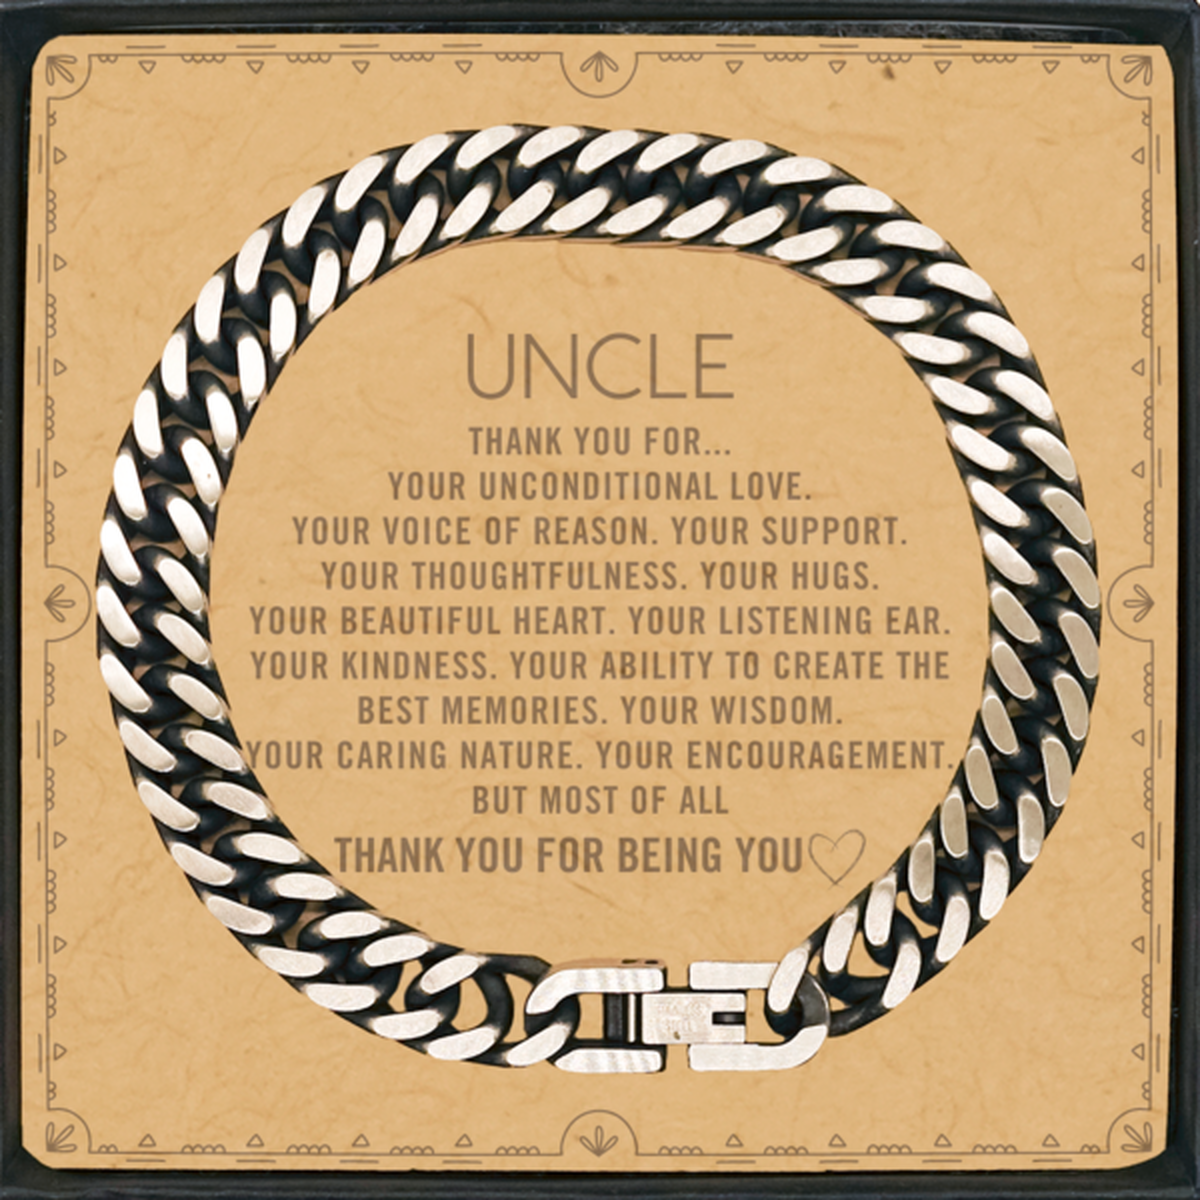 Uncle Cuban Link Chain Bracelet Custom, Message Card Gifts For Uncle Christmas Graduation Birthday Gifts for Men Women Uncle Thank you for Your unconditional love